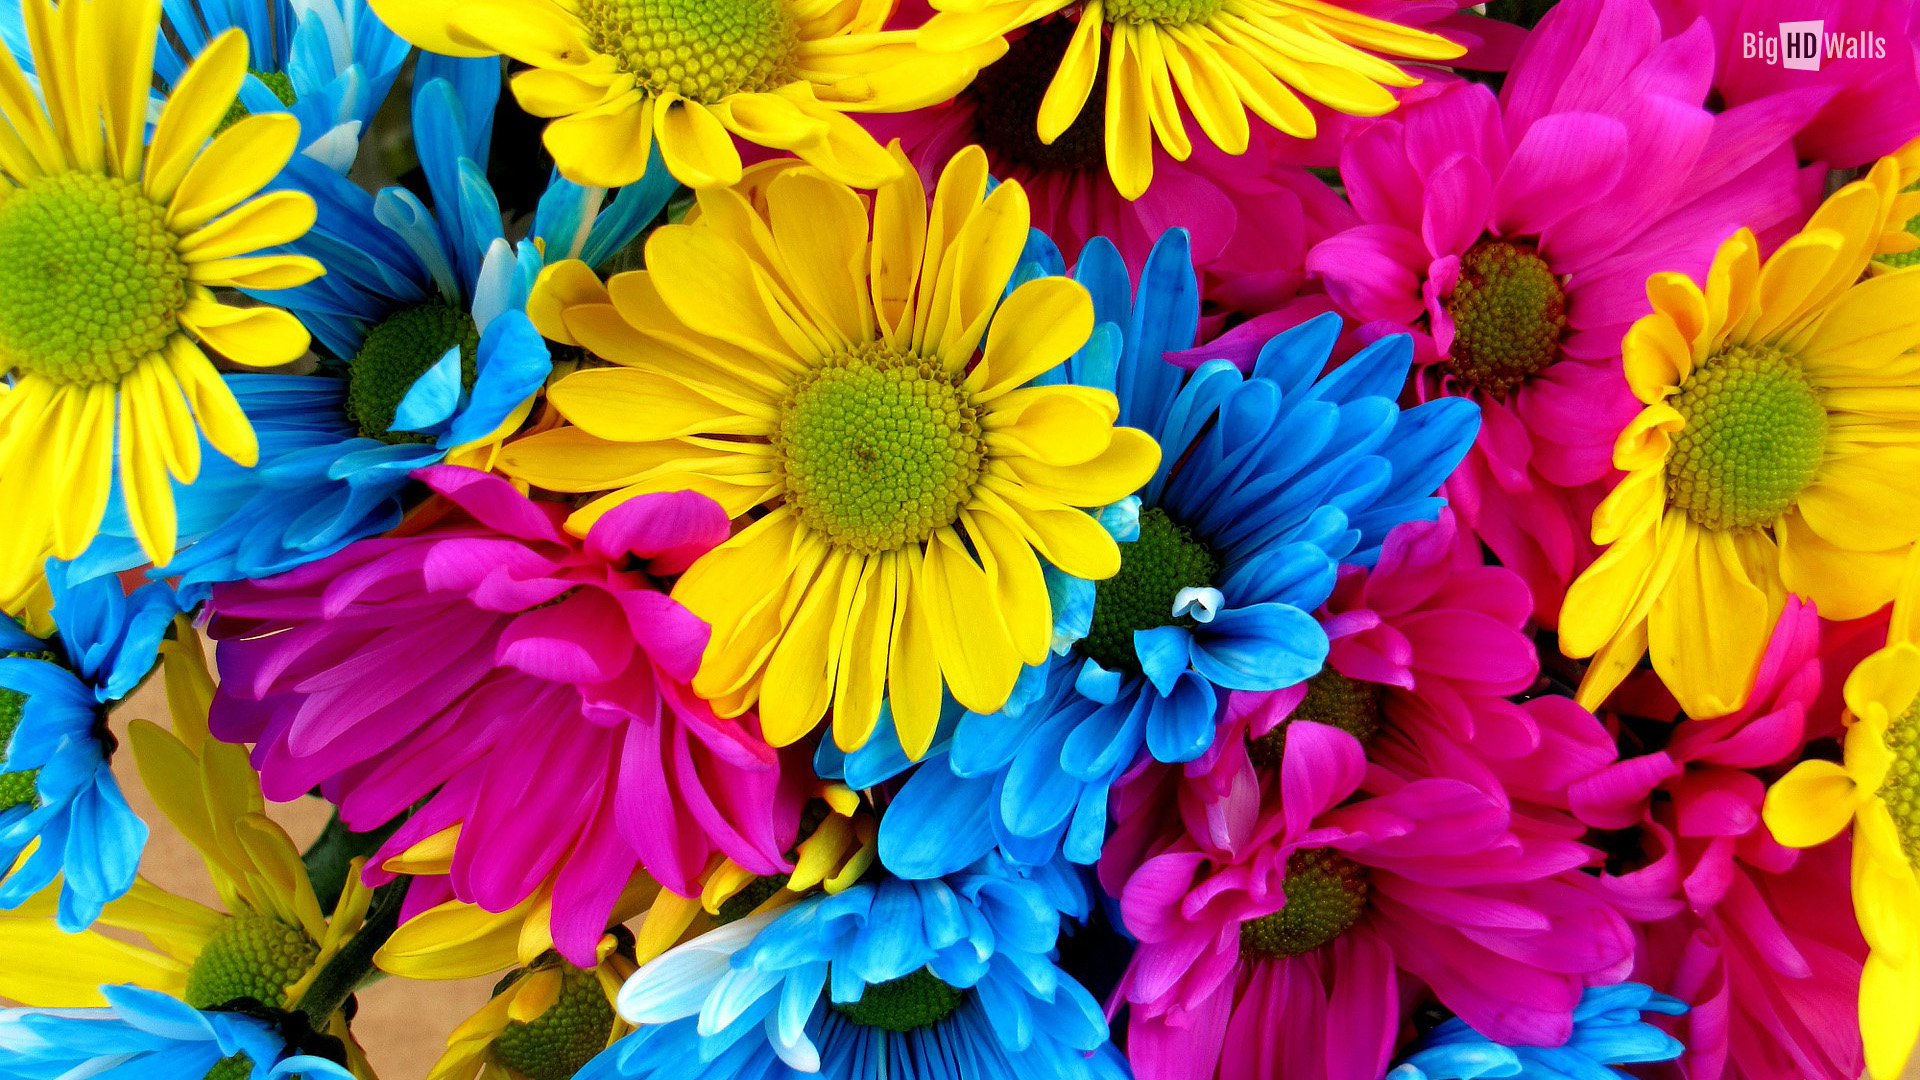 Displaying 16 Images For   Colorful Daisy Flower Wallpaper